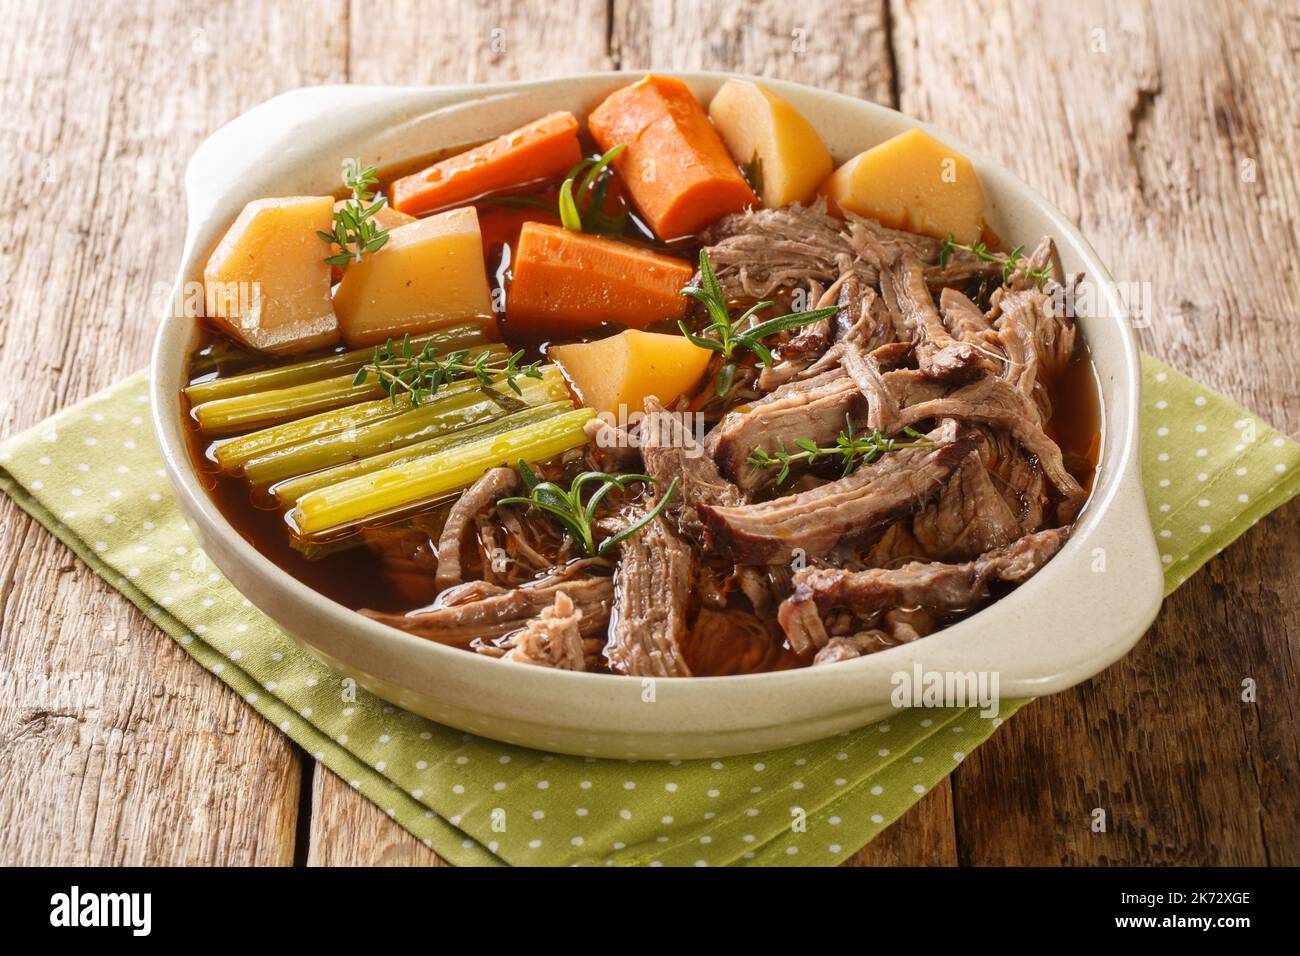 Slow cooked pot roast with carrots, celery, potatoes, garlic and gravy closeup in the bowl on the wooden table. Horizontal Stock Photo